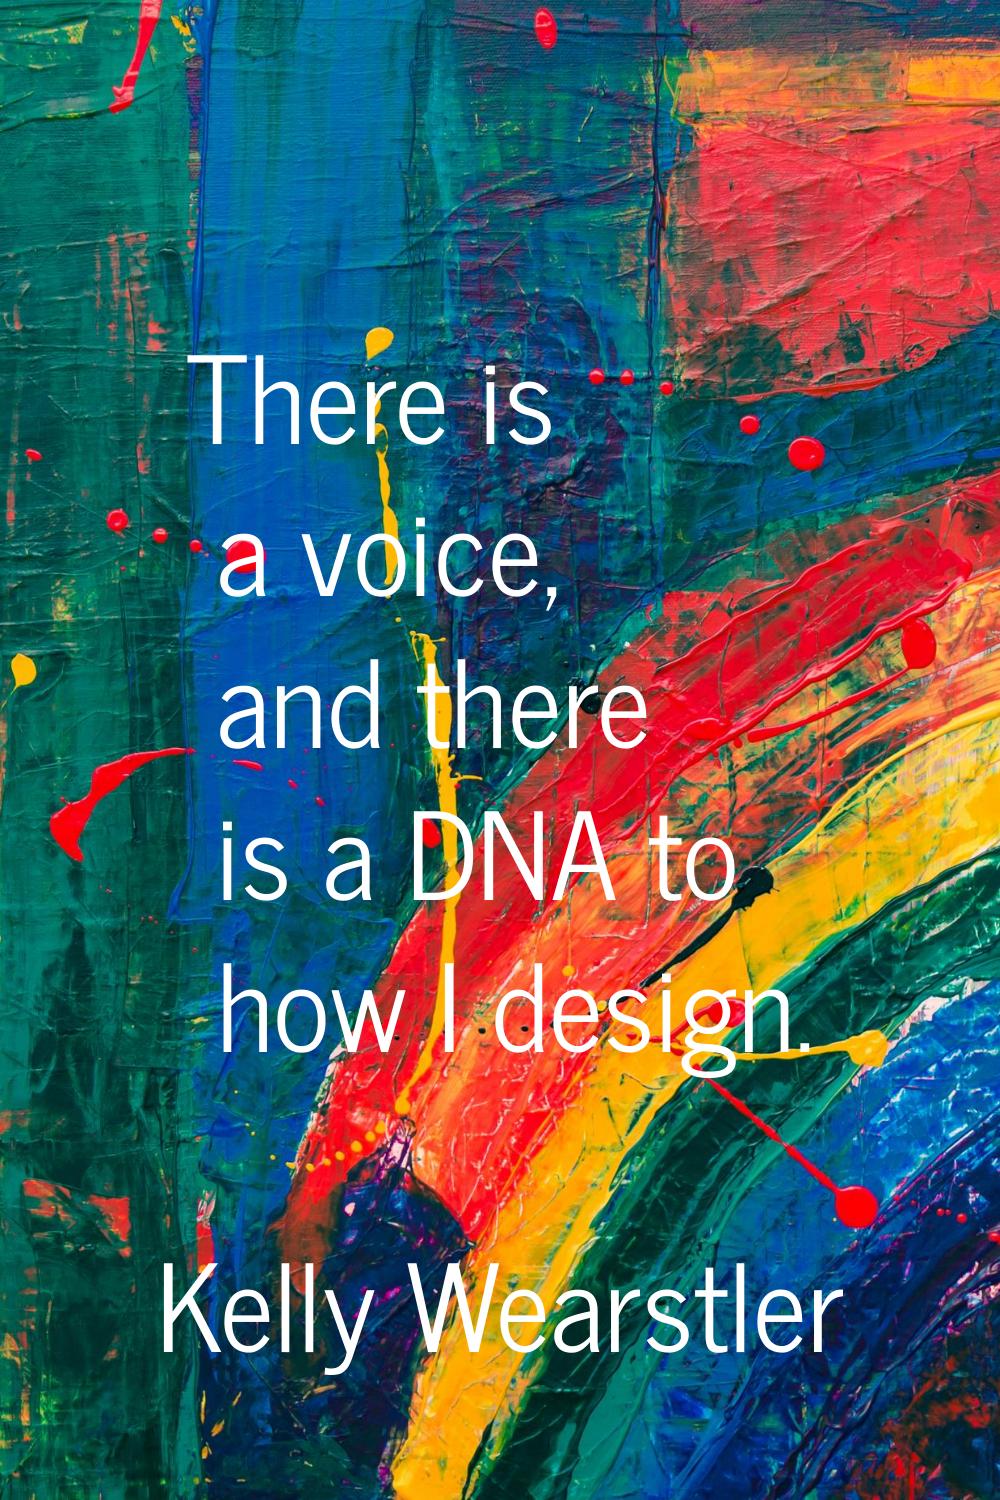 There is a voice, and there is a DNA to how I design.